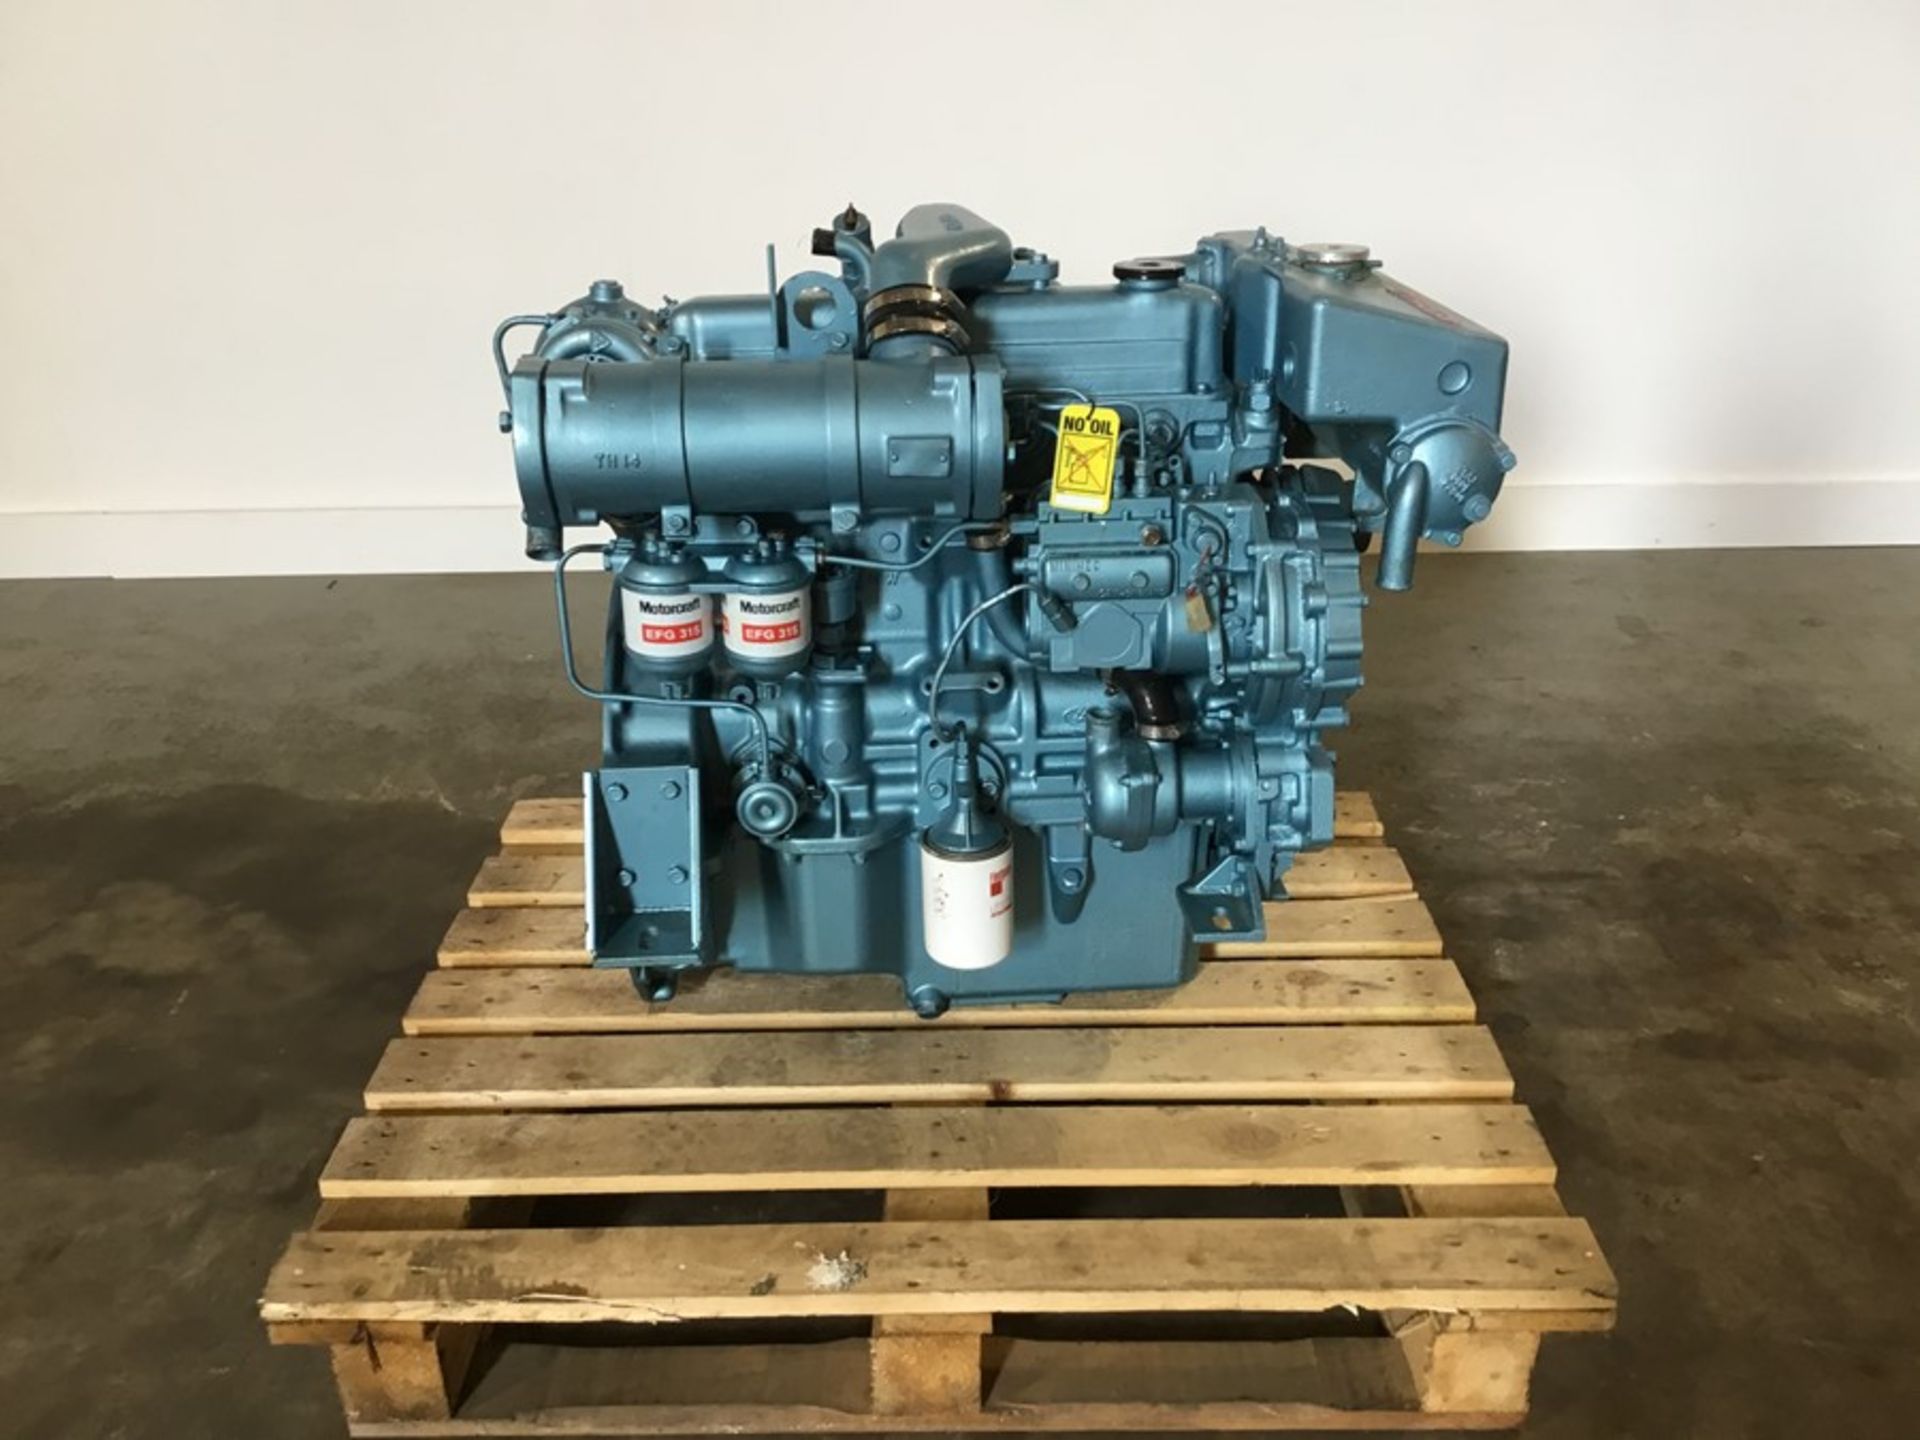 Ford 2722E Marine Diesel engine: Ford 2722e 4cyl Turbo 140Hp @2500Rpm used low hours - Image 17 of 18